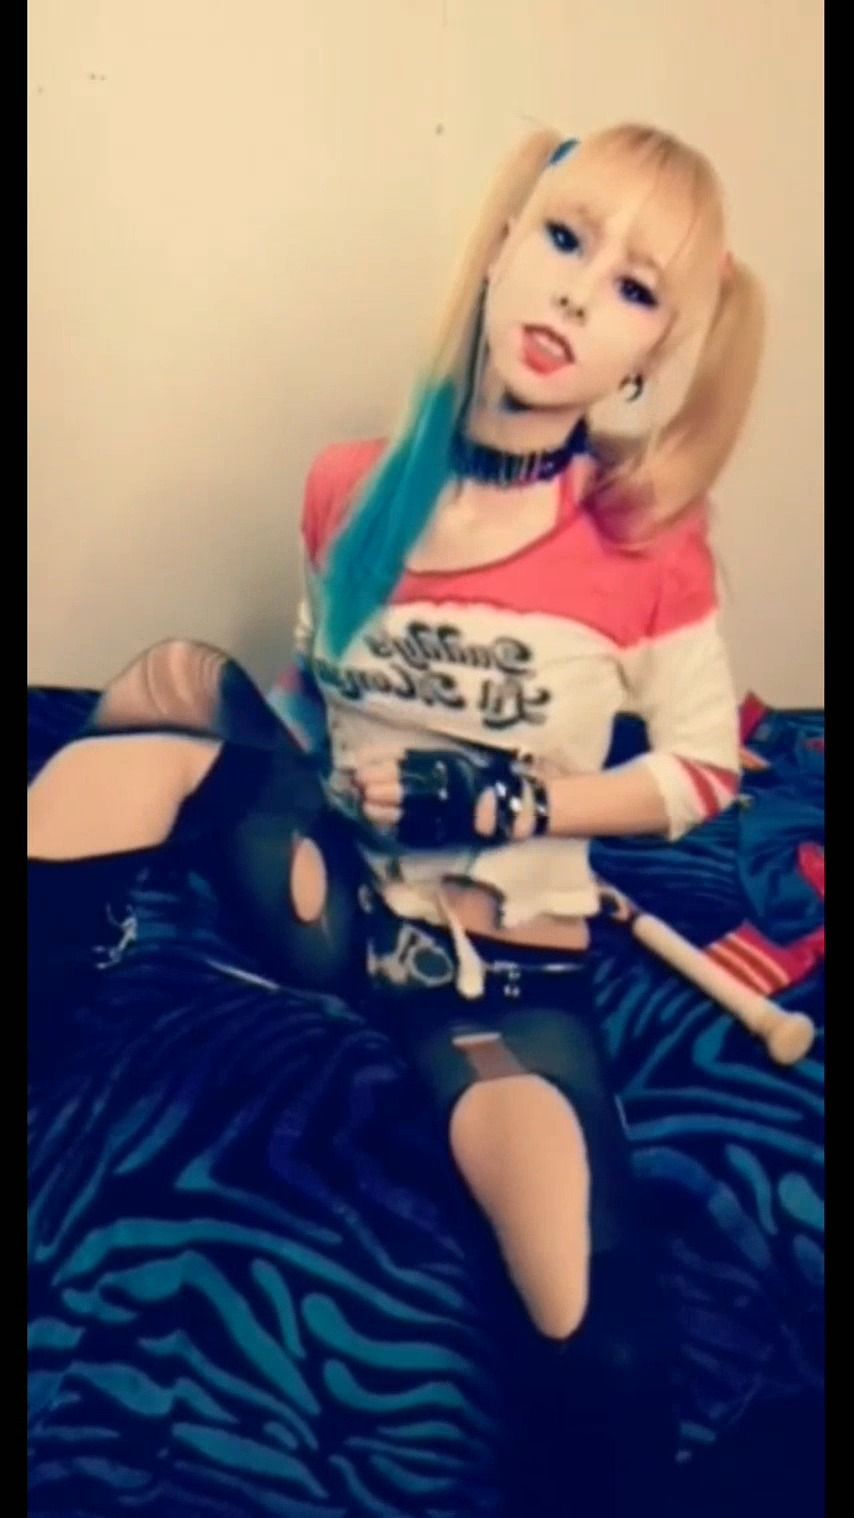 Captured by Harley Quinn